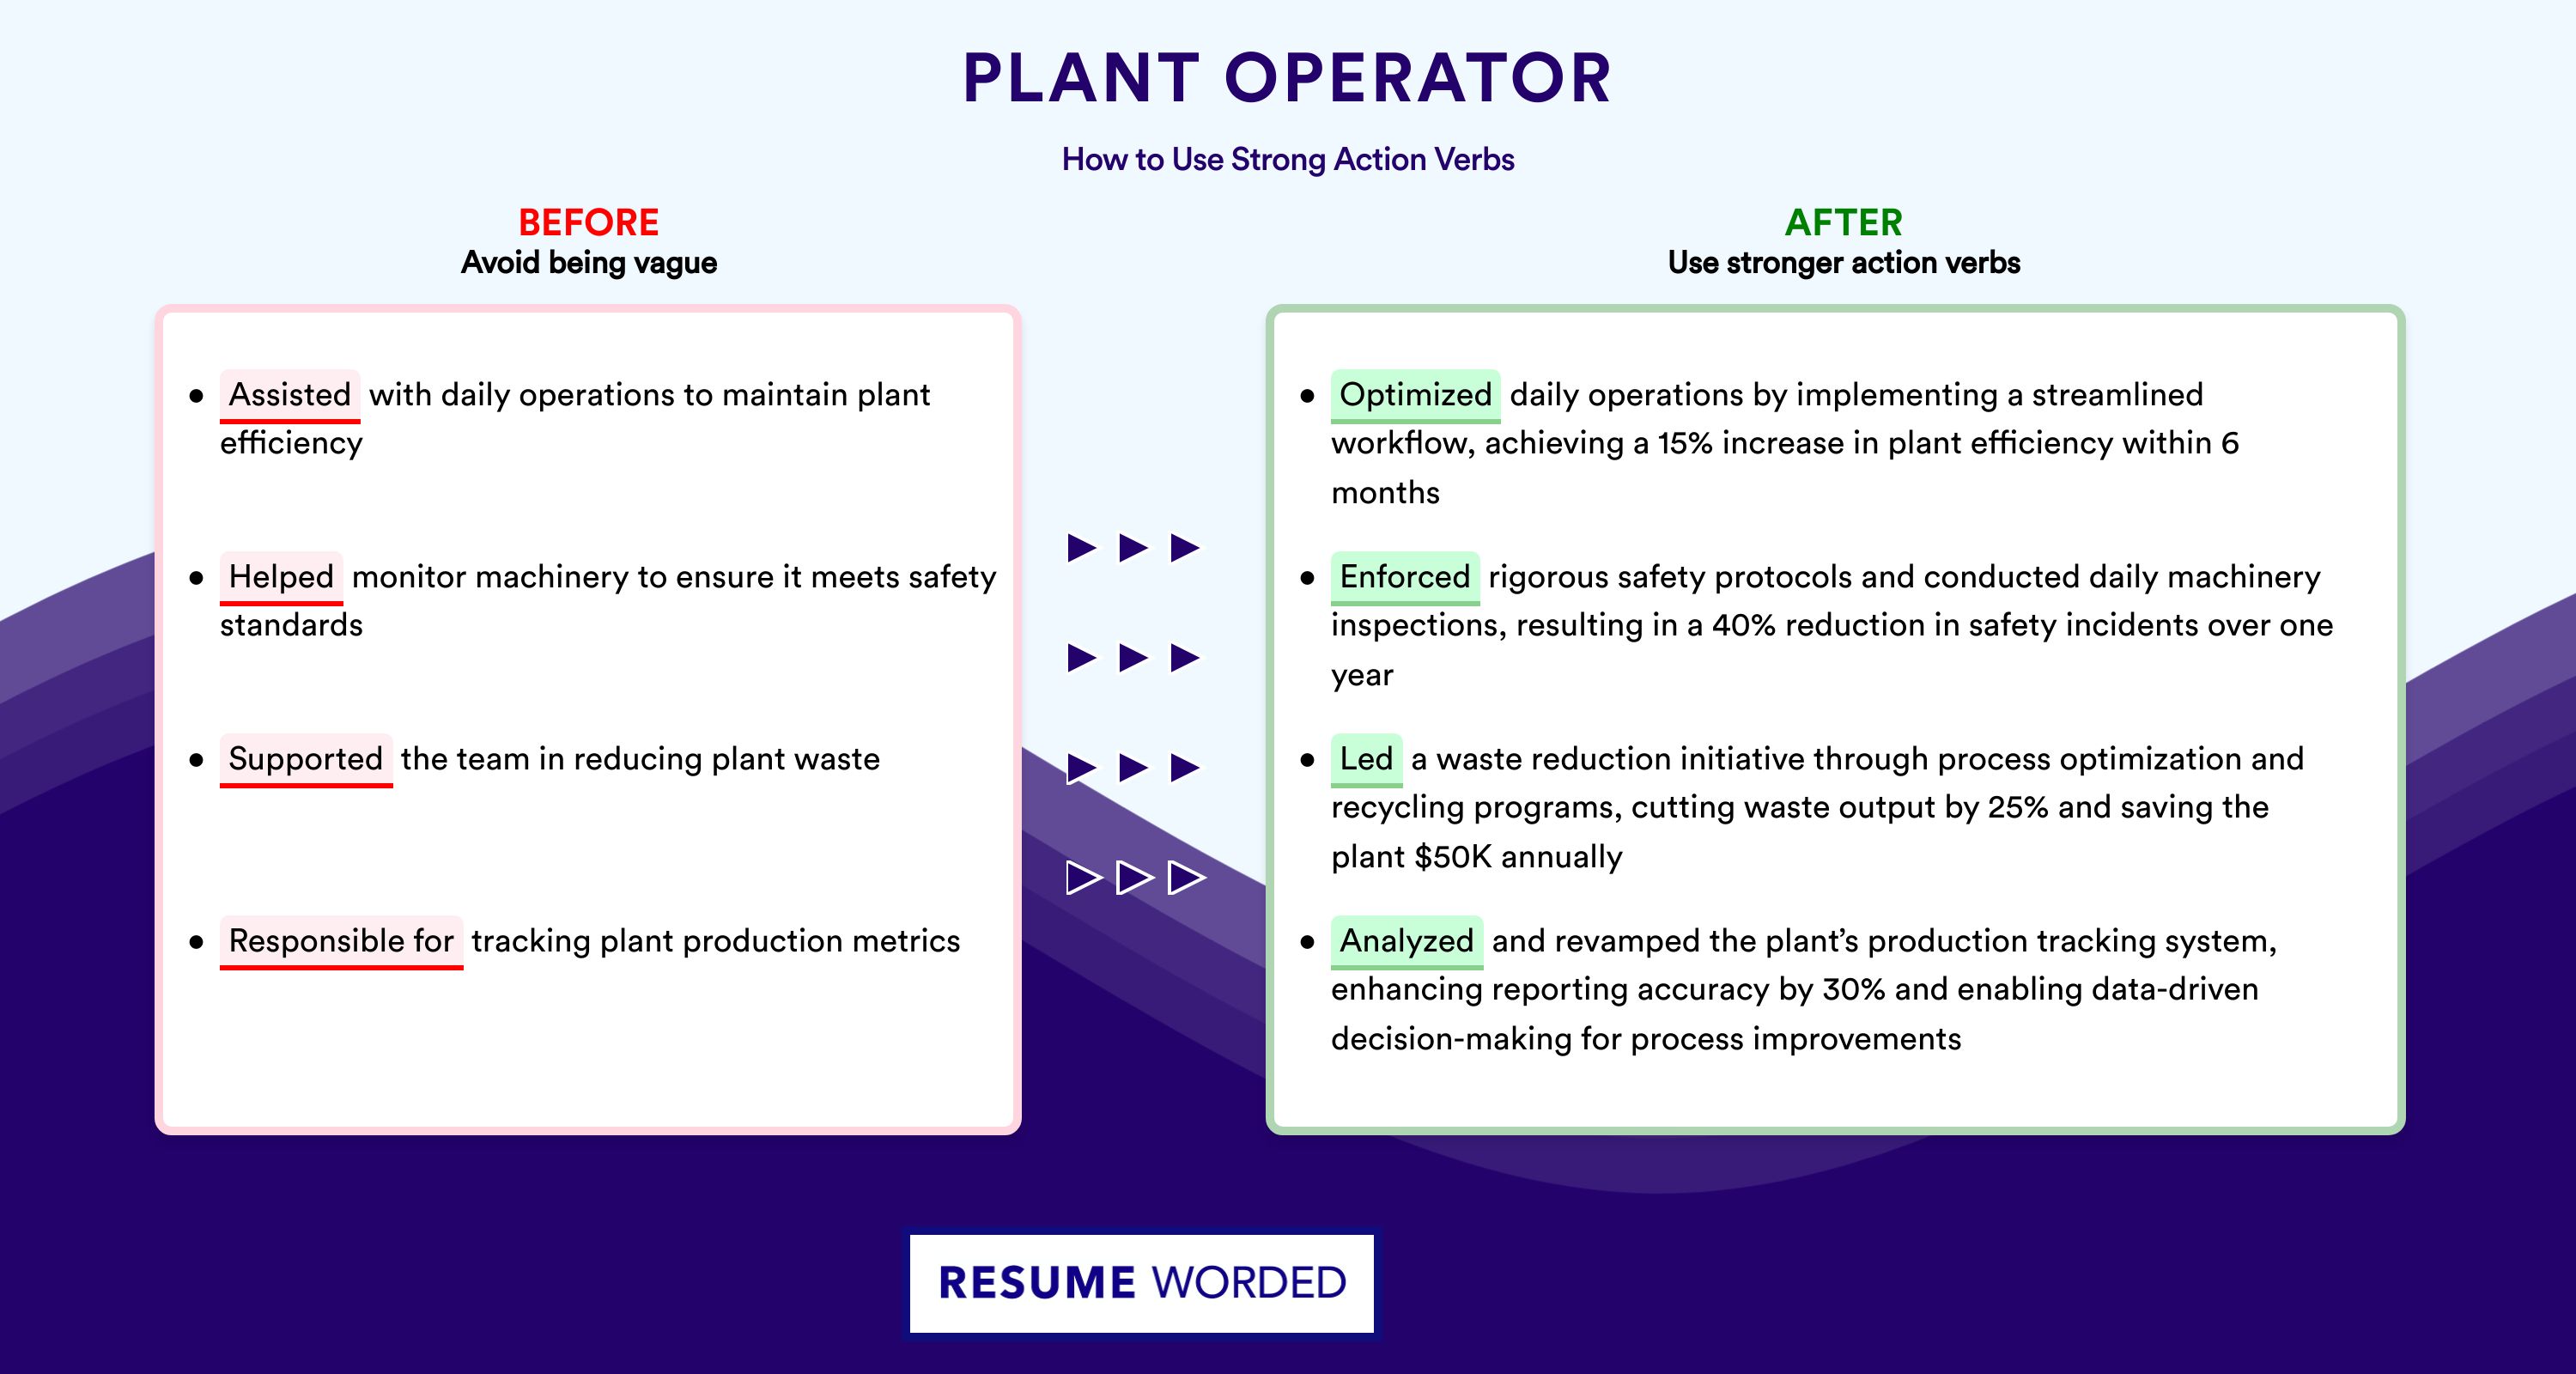 Action Verbs for Plant Operator